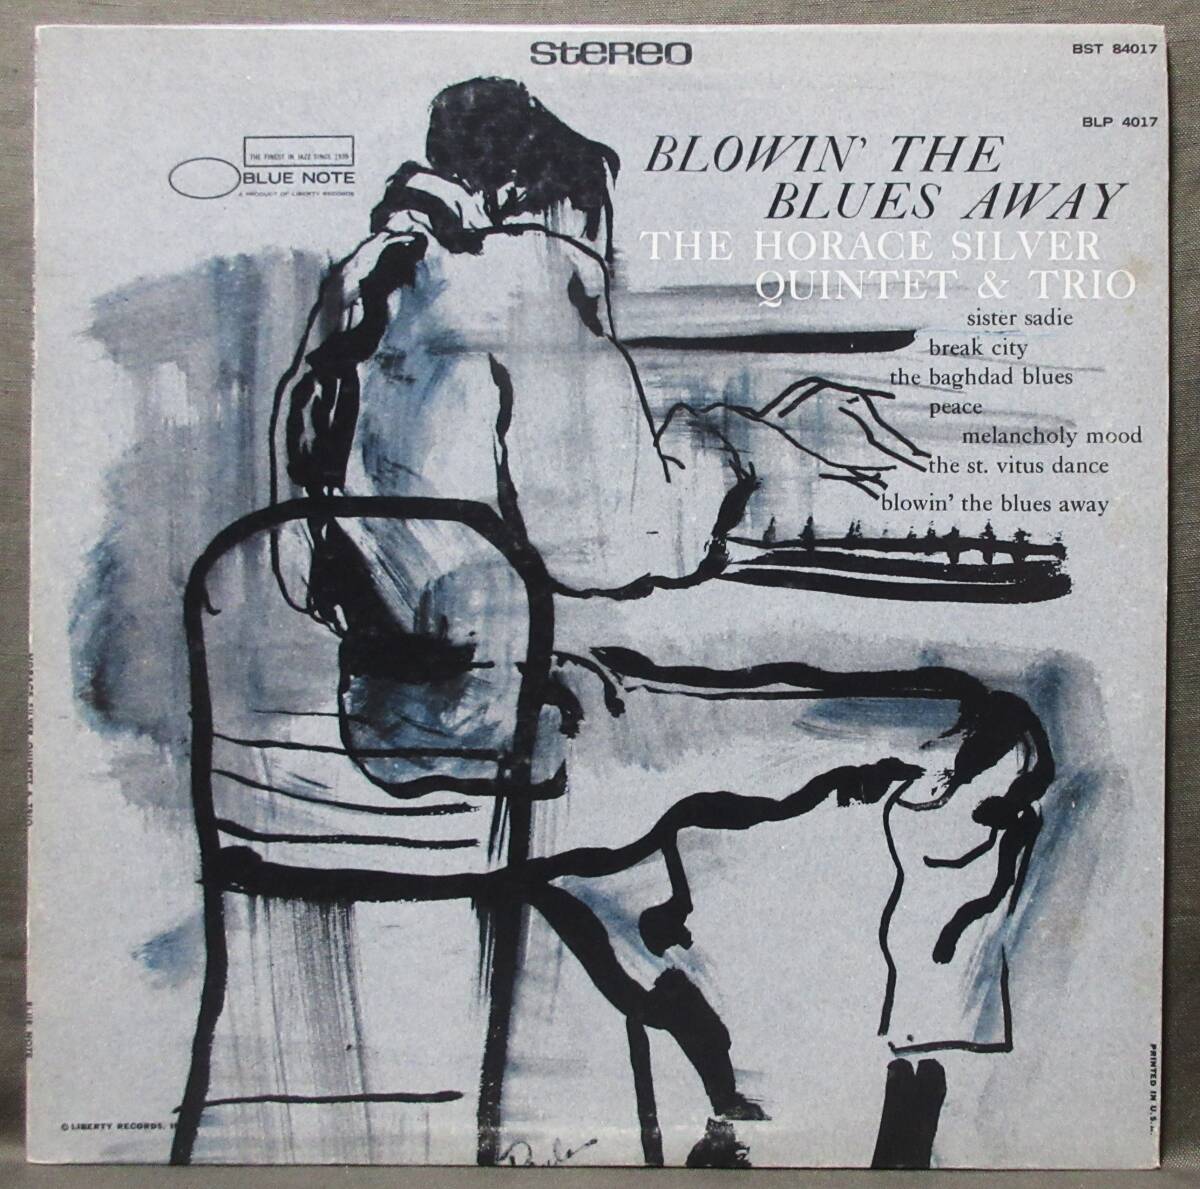 (LP) US/BLUE NOTE(LIBERTY) HORACE SILVER [BLOWIN' THE BLUES AWAY] RVG刻印有り/ホレスシルヴァー/Blue Mitchell/Junior Cook//BST84017の画像1